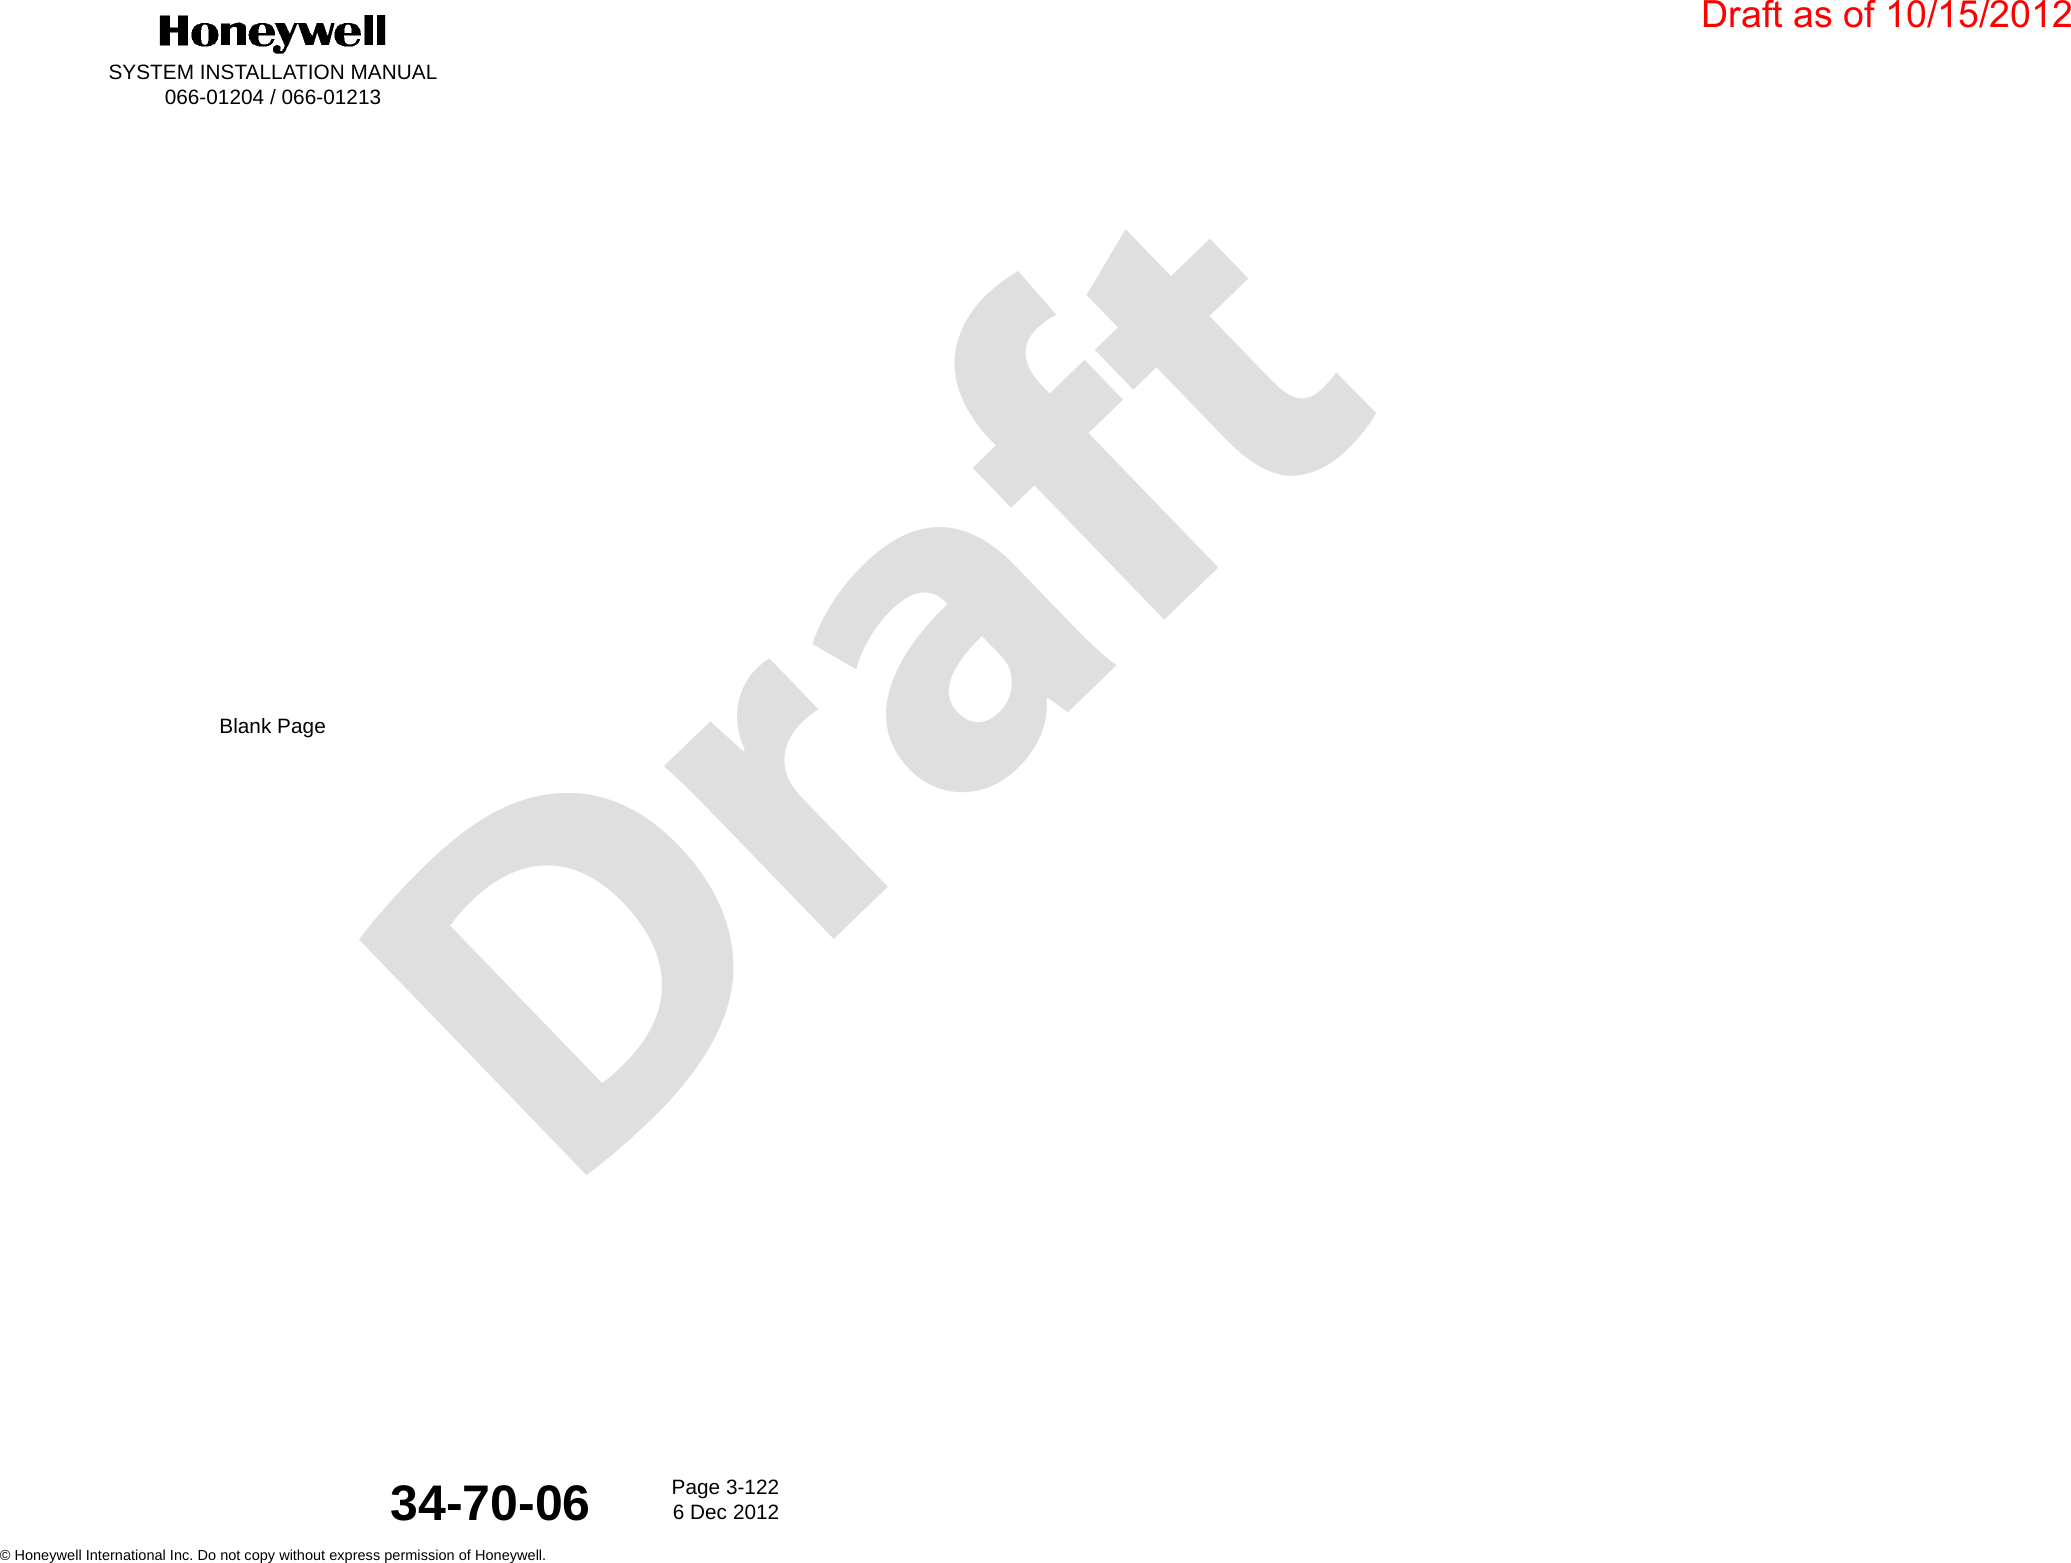 DraftSYSTEM INSTALLATION MANUAL066-01204 / 066-01213Page 3-1226 Dec 2012© Honeywell International Inc. Do not copy without express permission of Honeywell.34-70-06Blank PageDraft as of 10/15/2012